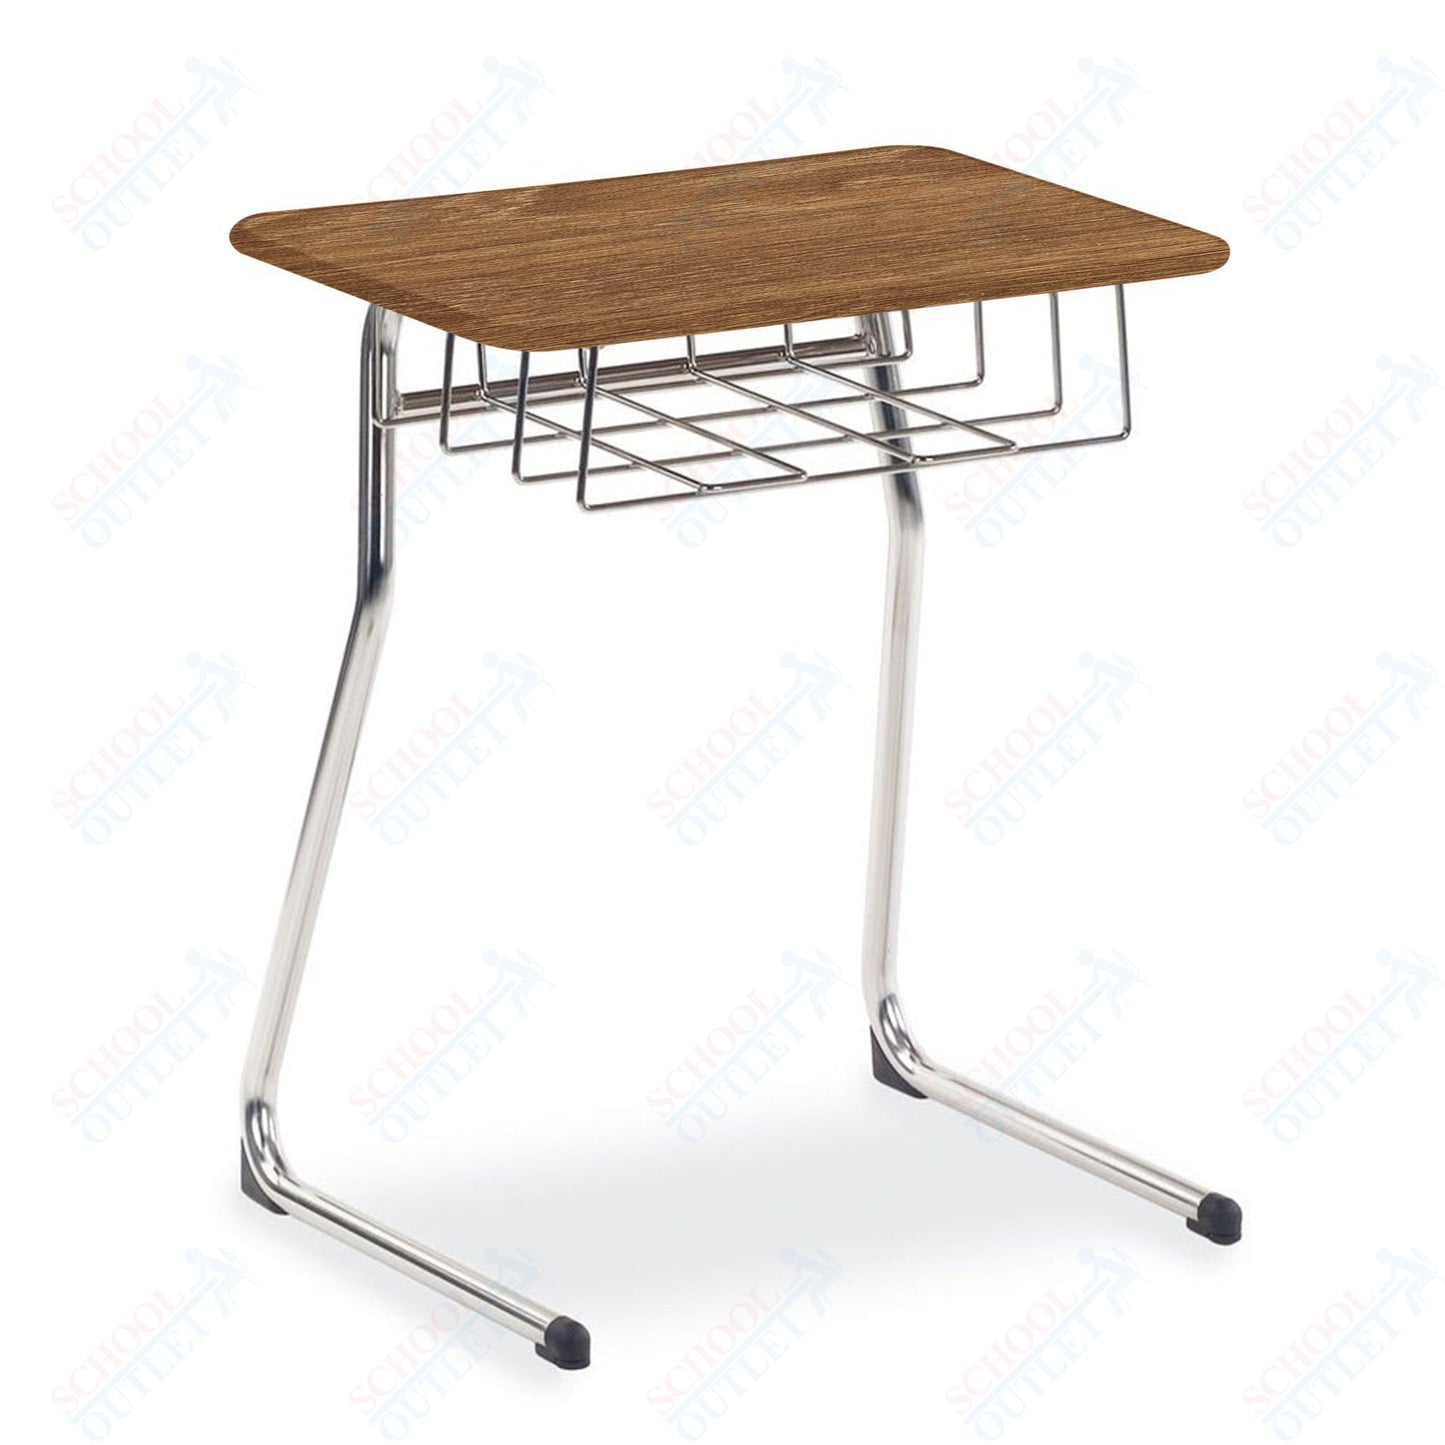 Virco Sigma Series 25" Fixed Height Student Desk, Cantilever Leg and 20" x 26" Top and Wire Book Basket (Virco 73325BR)